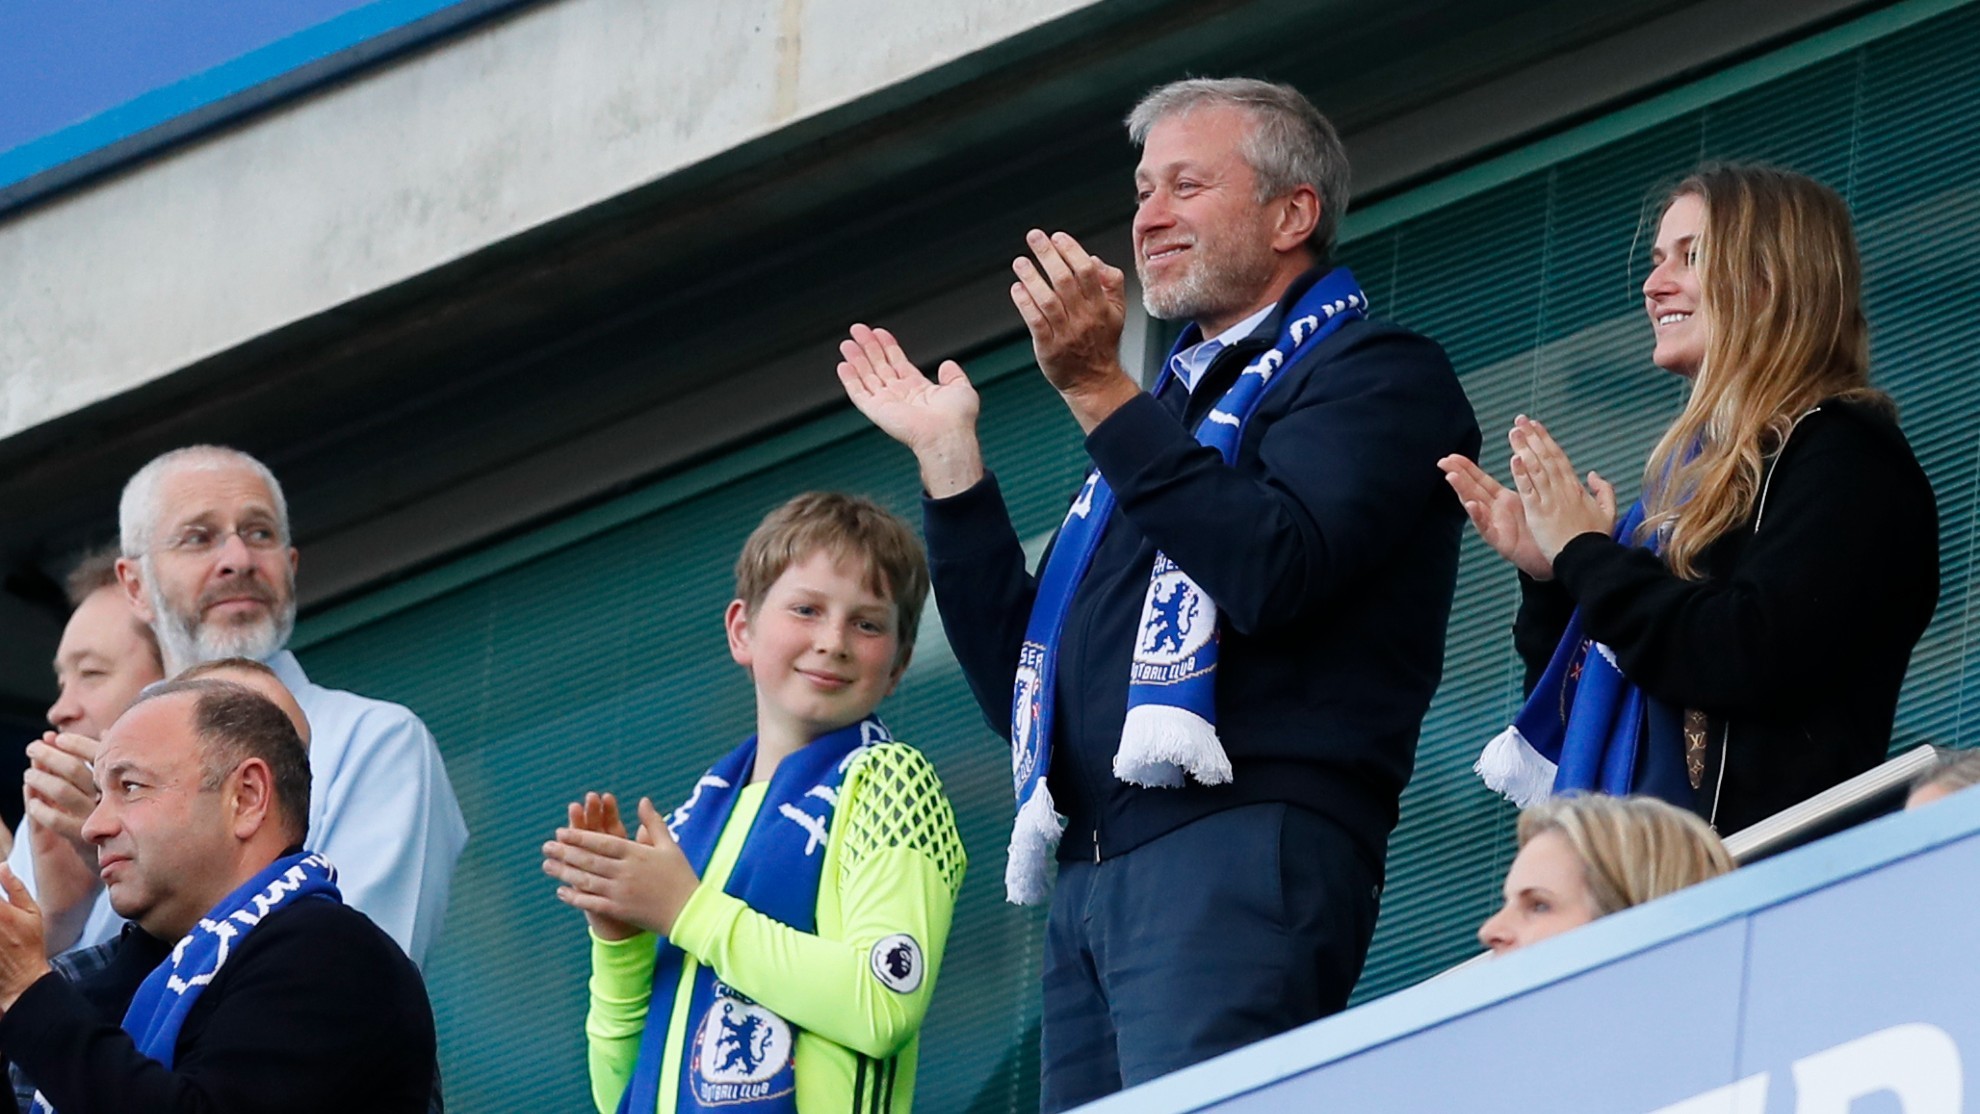 Russian tycoon Roman Abramovich insists he will sell Chelsea and donate the proceeds to the victims of the war in Ukraine